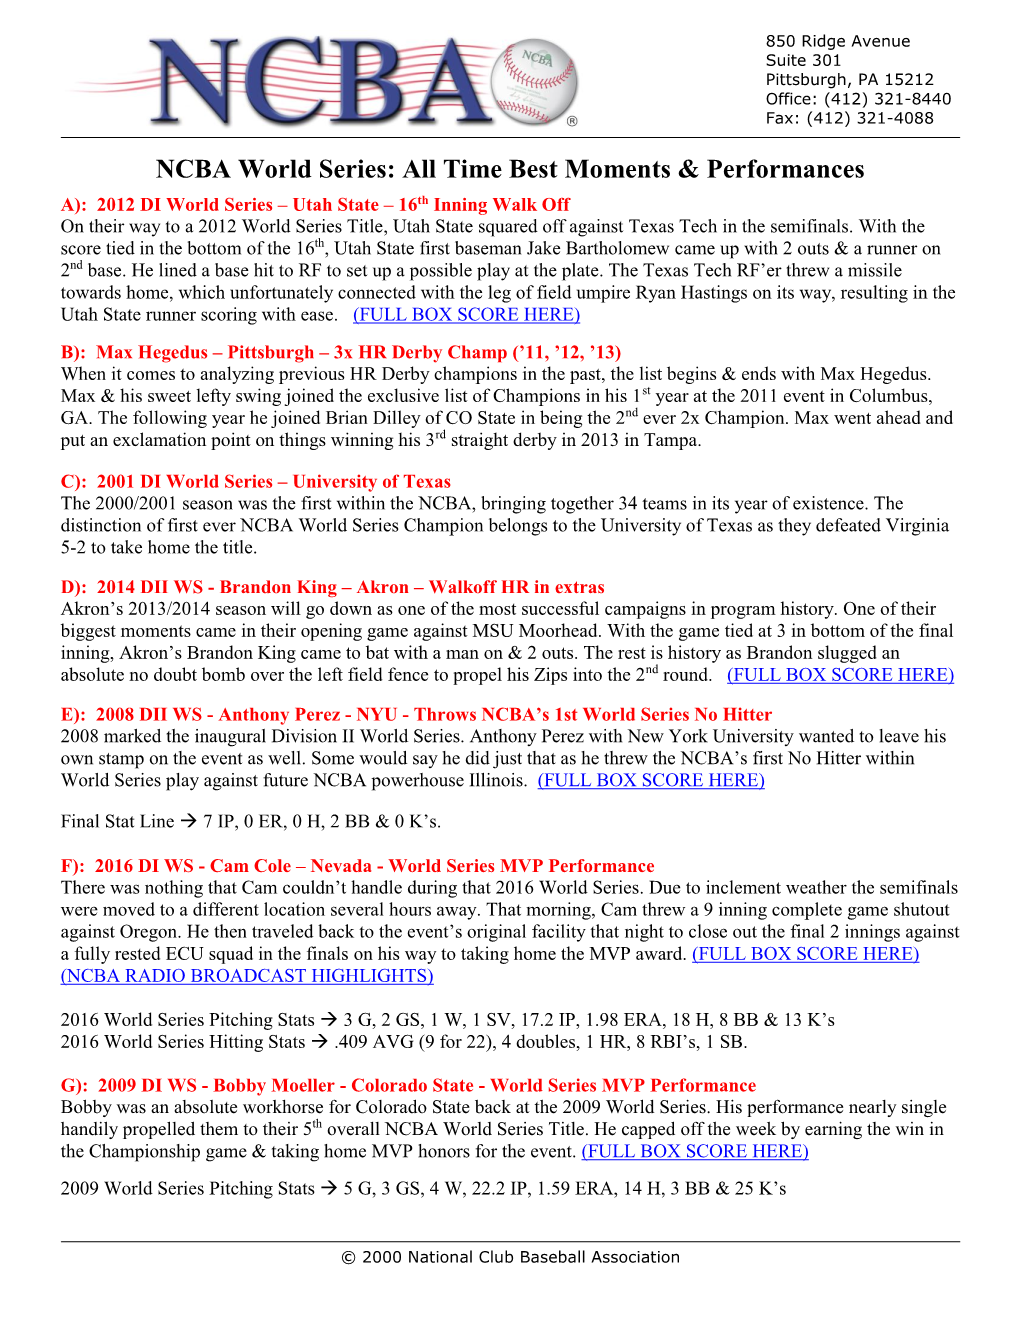 NCBA World Series: All Time Best Moments & Performances